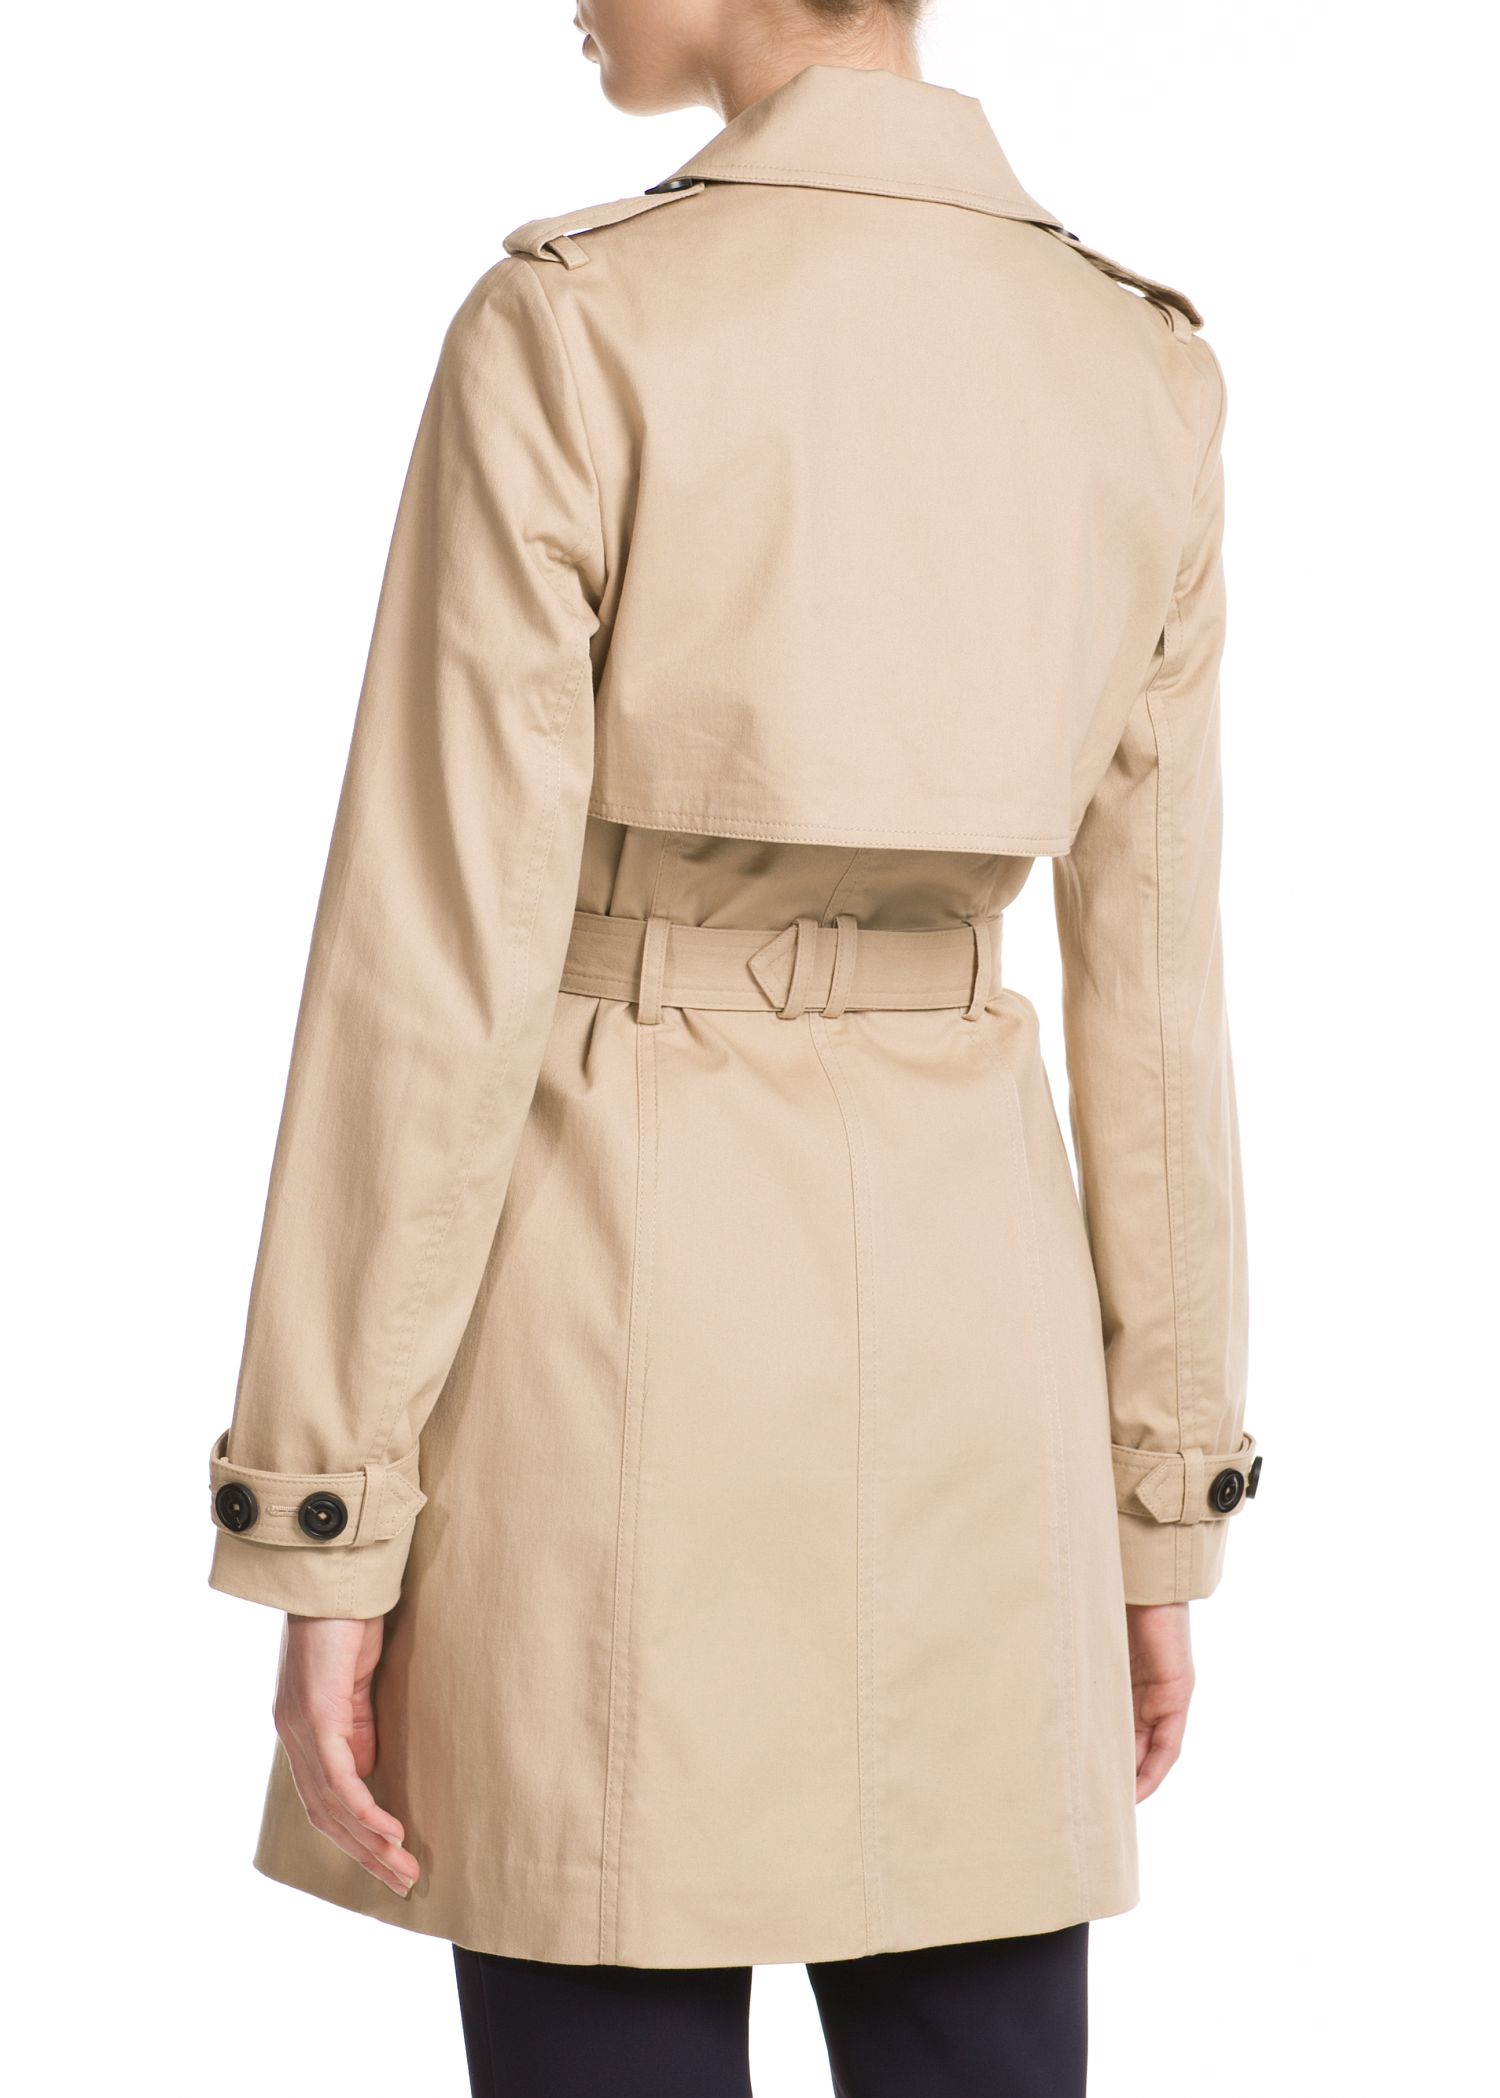 Mango Classic Cotton Trench Coat in Natural - Lyst